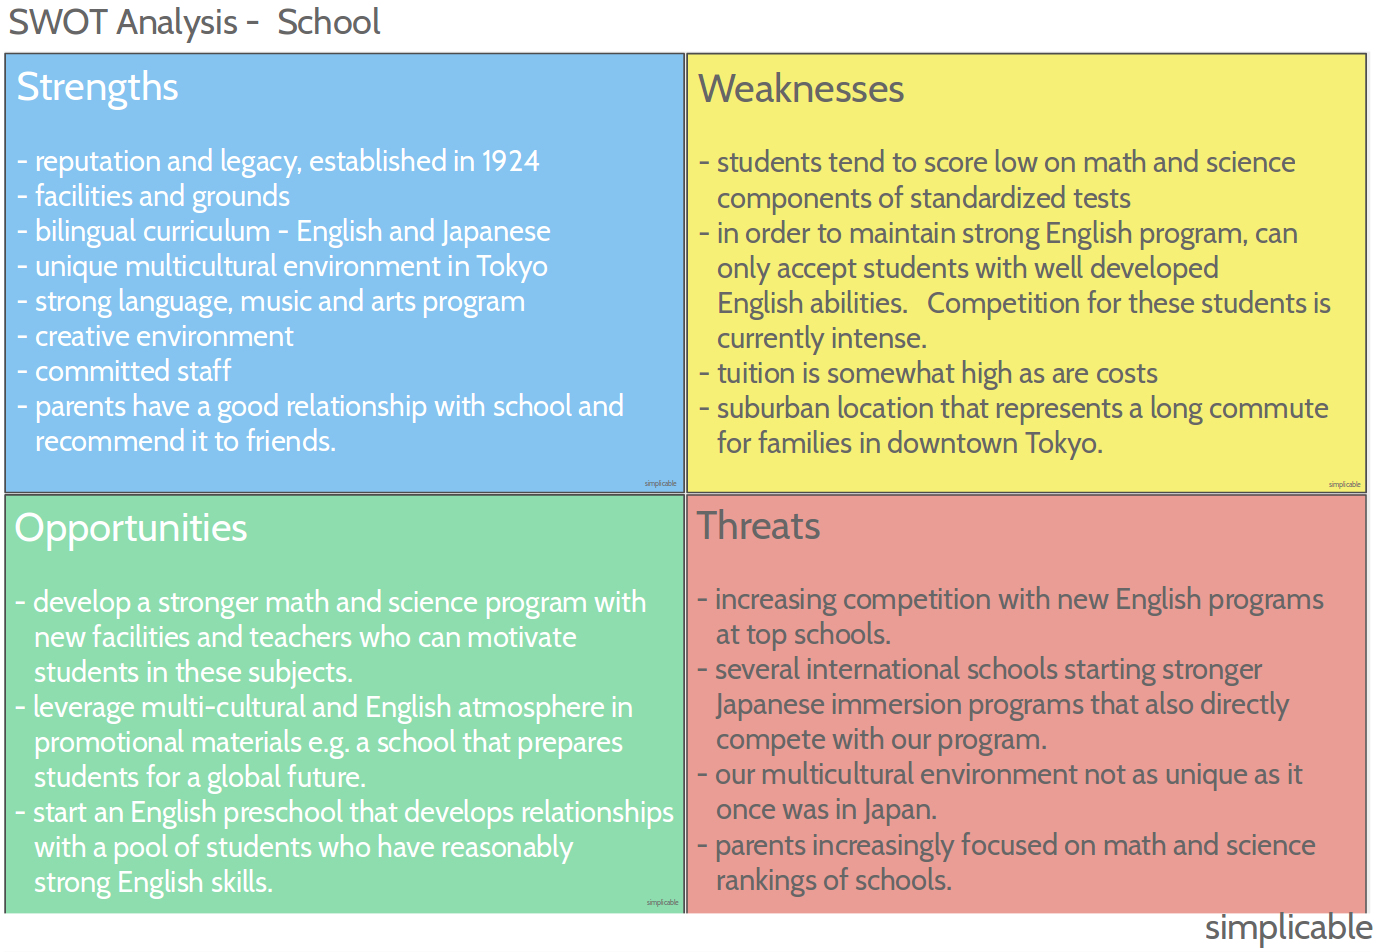 Illustrative example of a swot analysis for a school that offers a strong bilingual program but is facing new sources of competition.